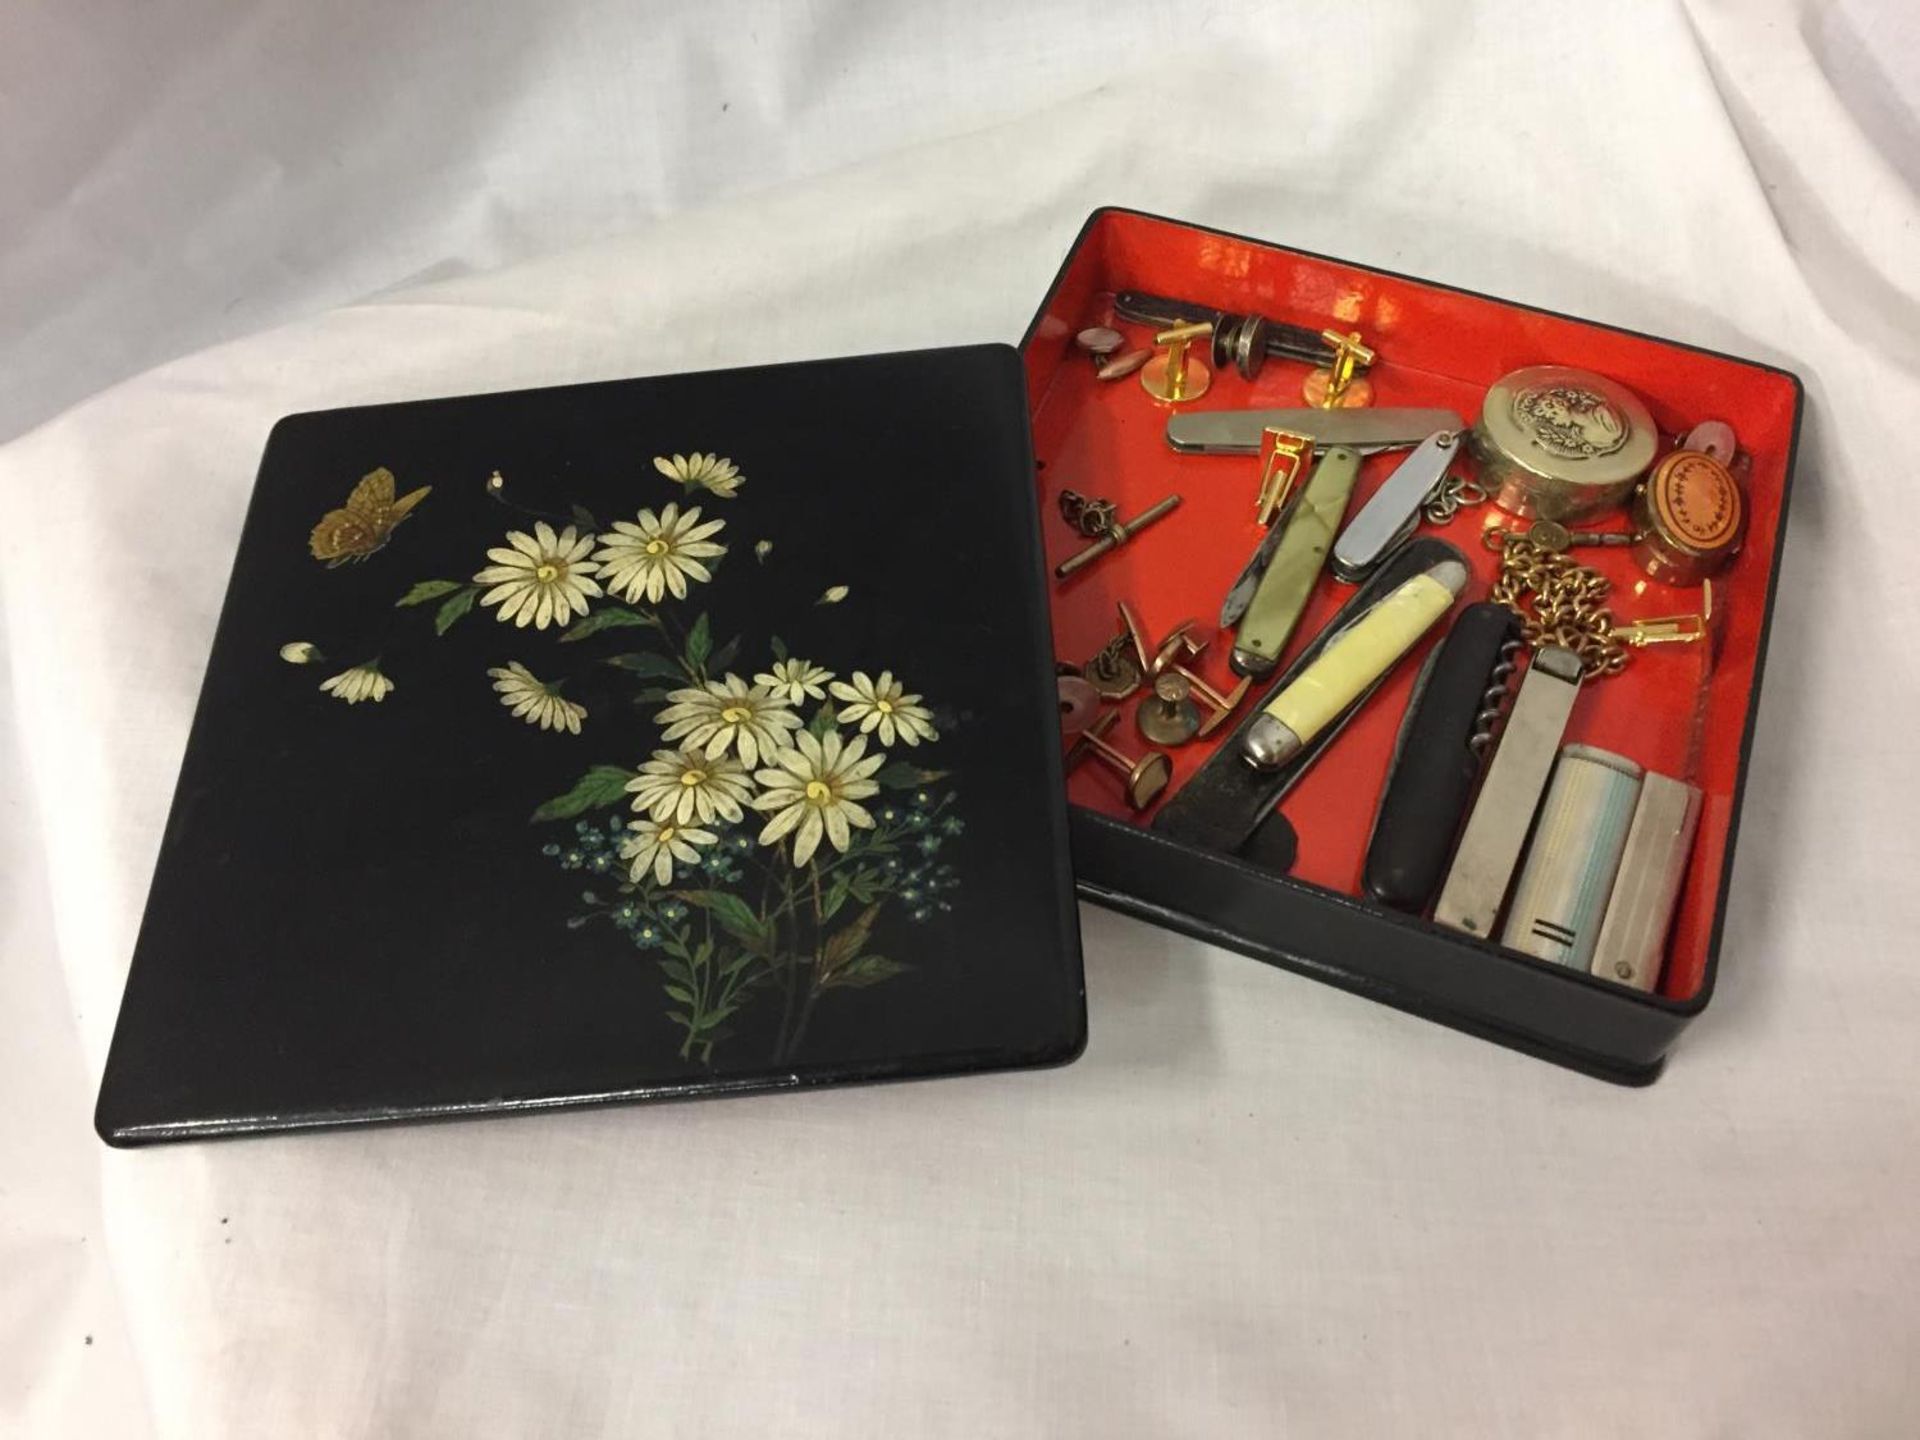 AN ORIENTAL SYLE LACQUERED BOX CONTAINING COLLECTABLES TO INCLUDE PEN KNIVES, CUFFLINKS AND PILL